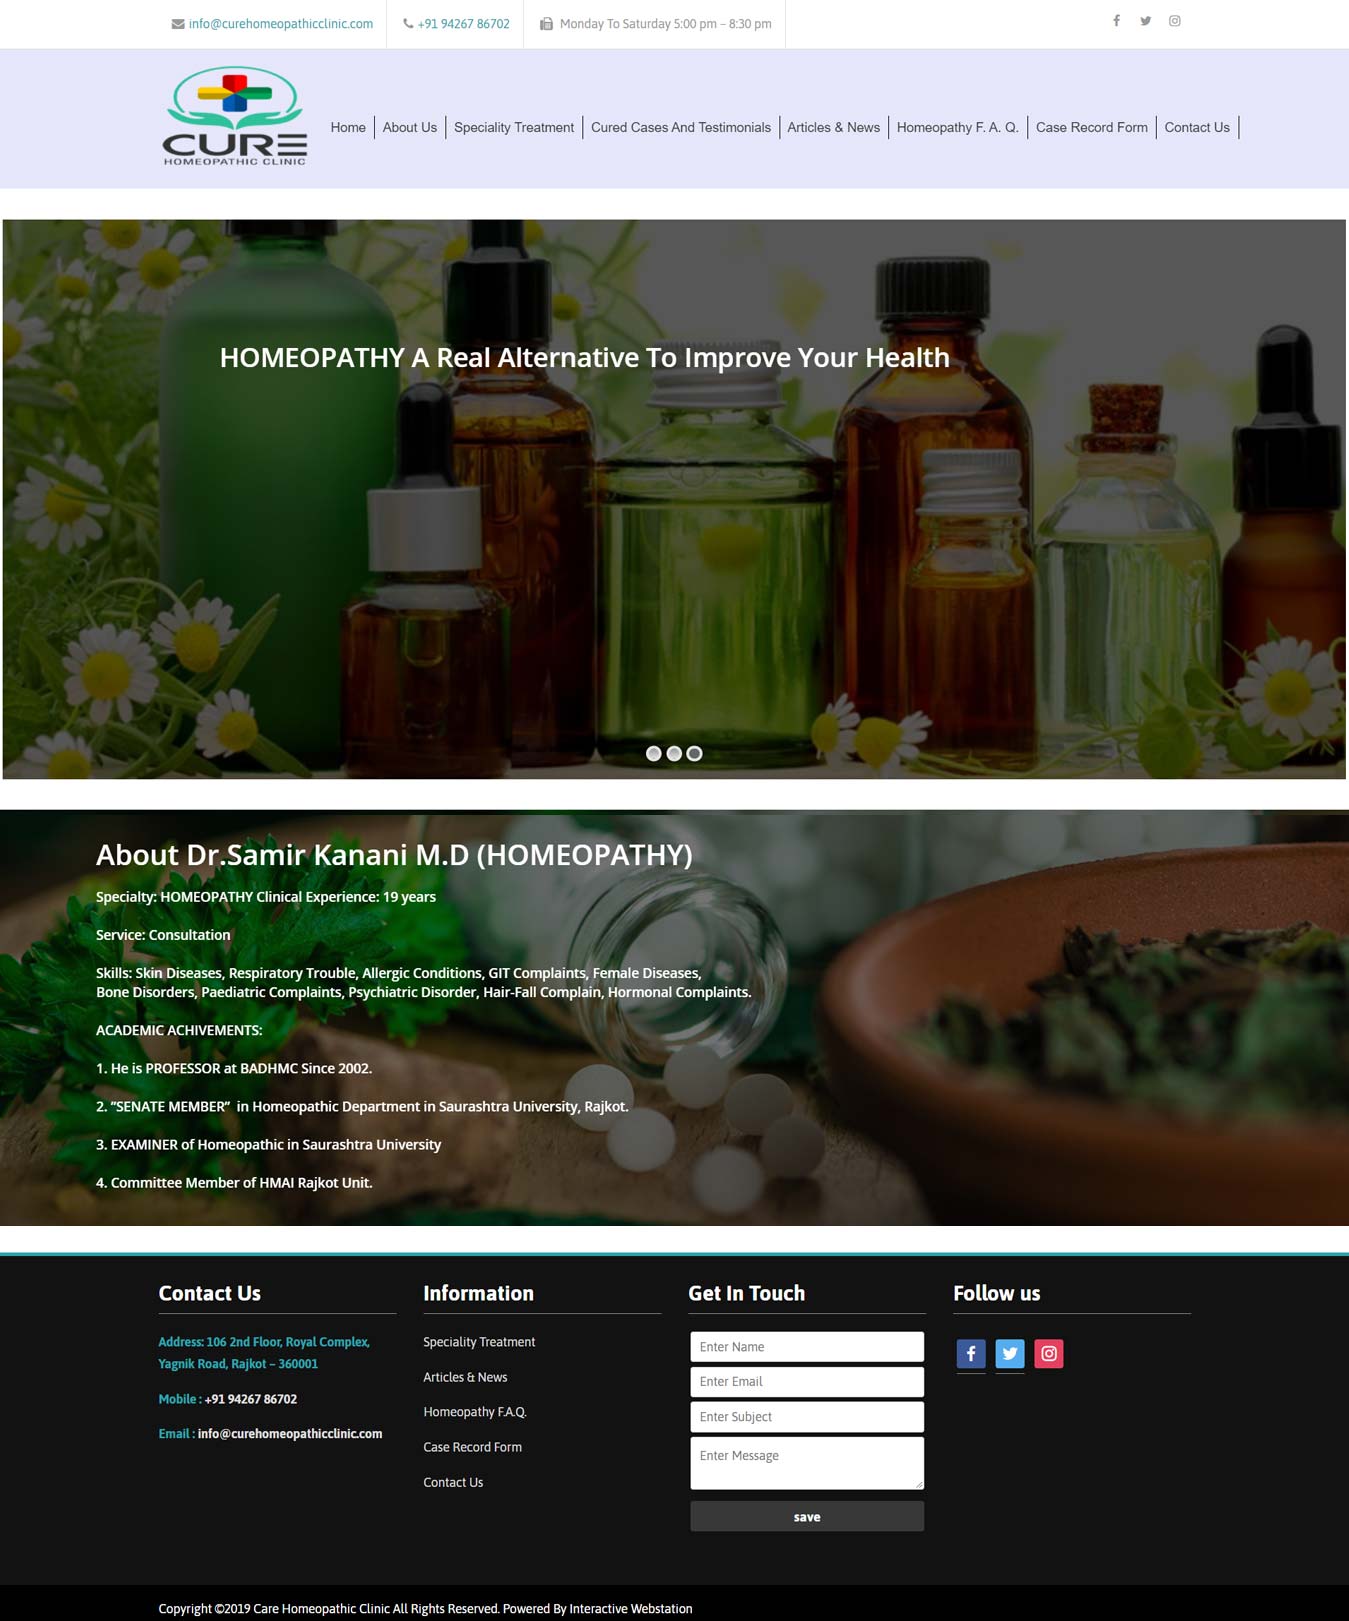 Cure Homeopathic Clinic